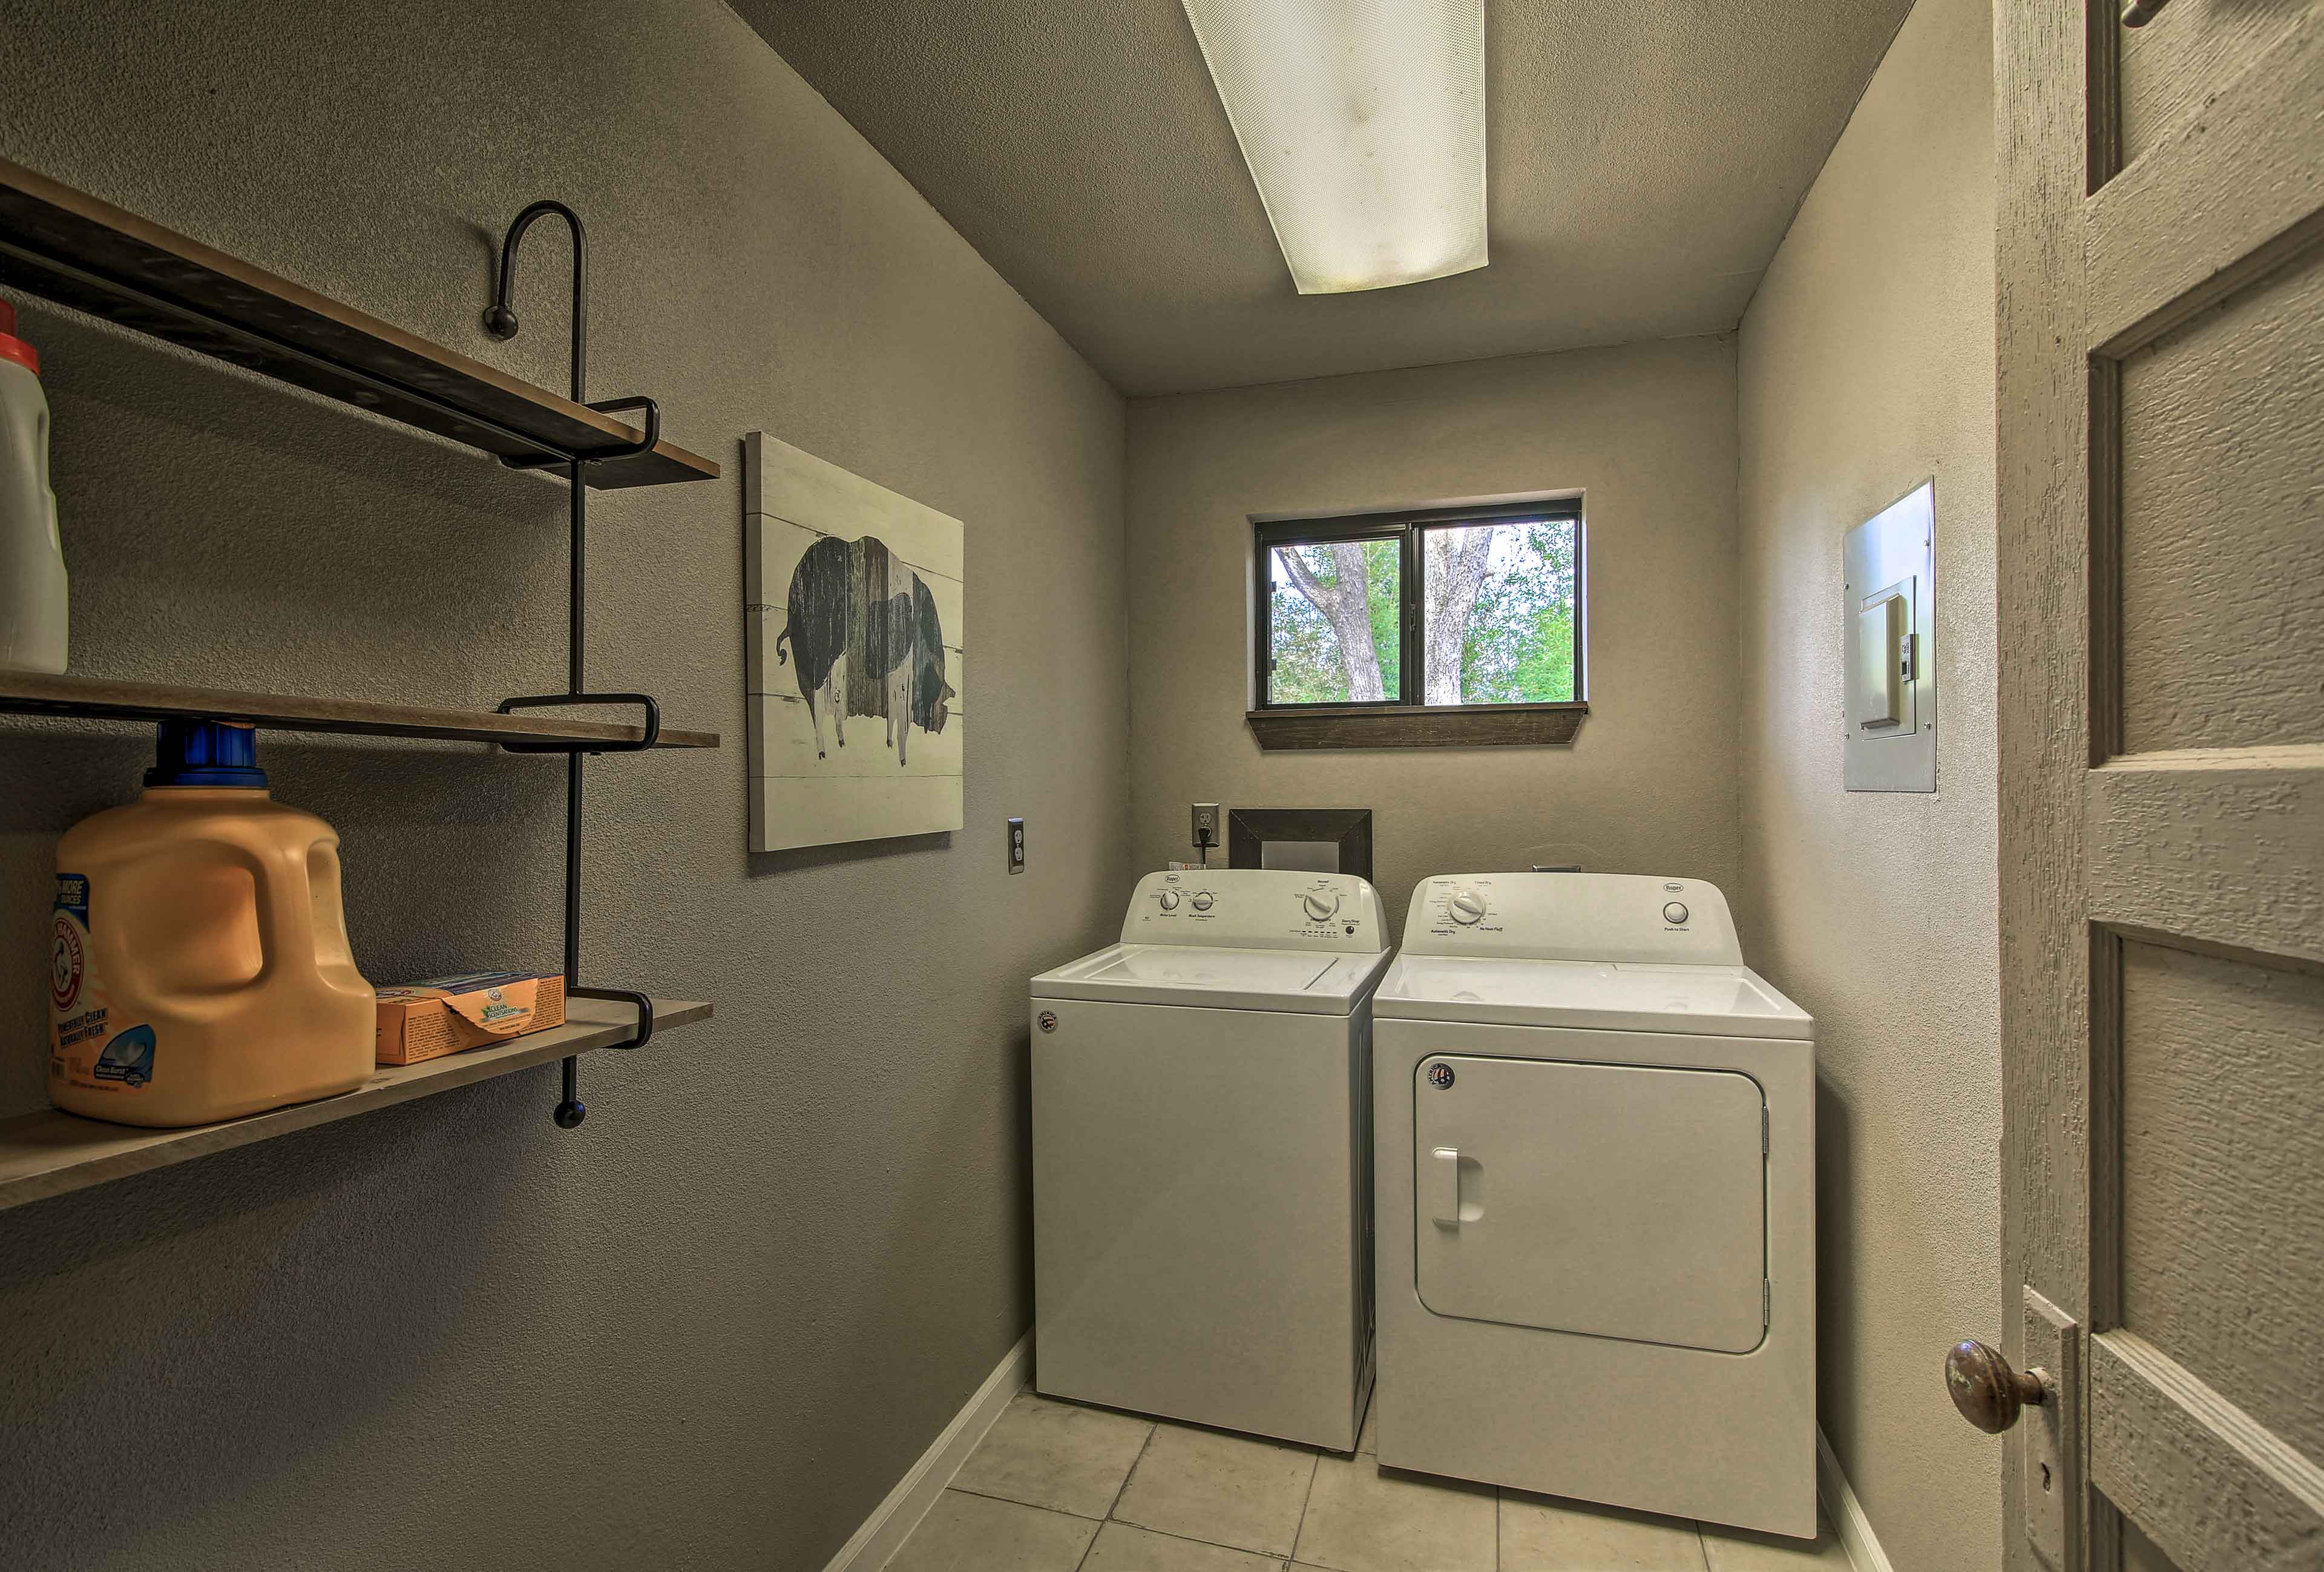 The cabin has in-unit laundry machines.